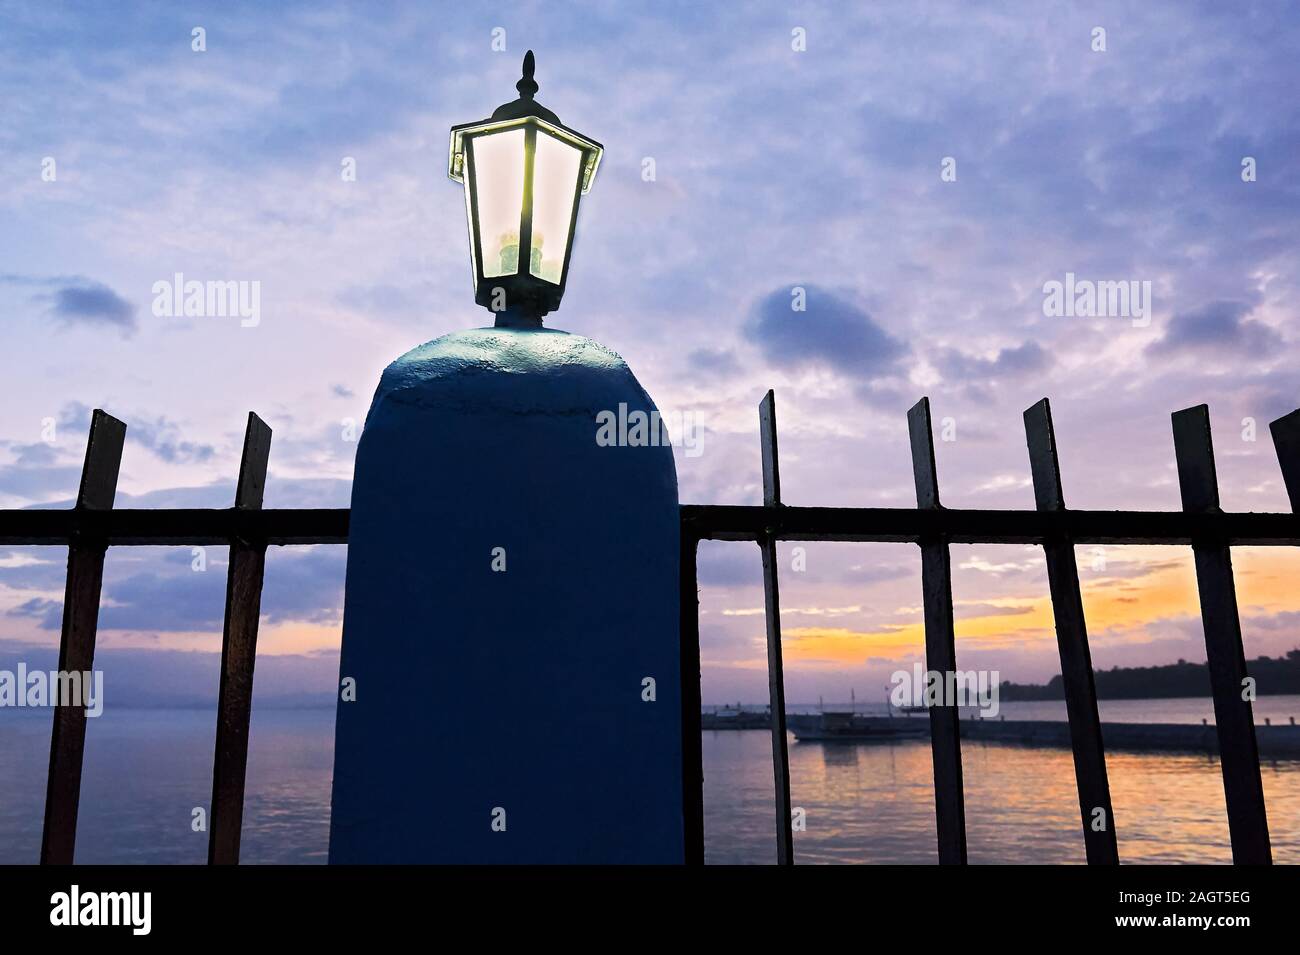 Colorful sunset with a metal fence and an illuminated fence light in the front, located at the Pier in San Vincente, Palawan Province, Philippines. Stock Photo